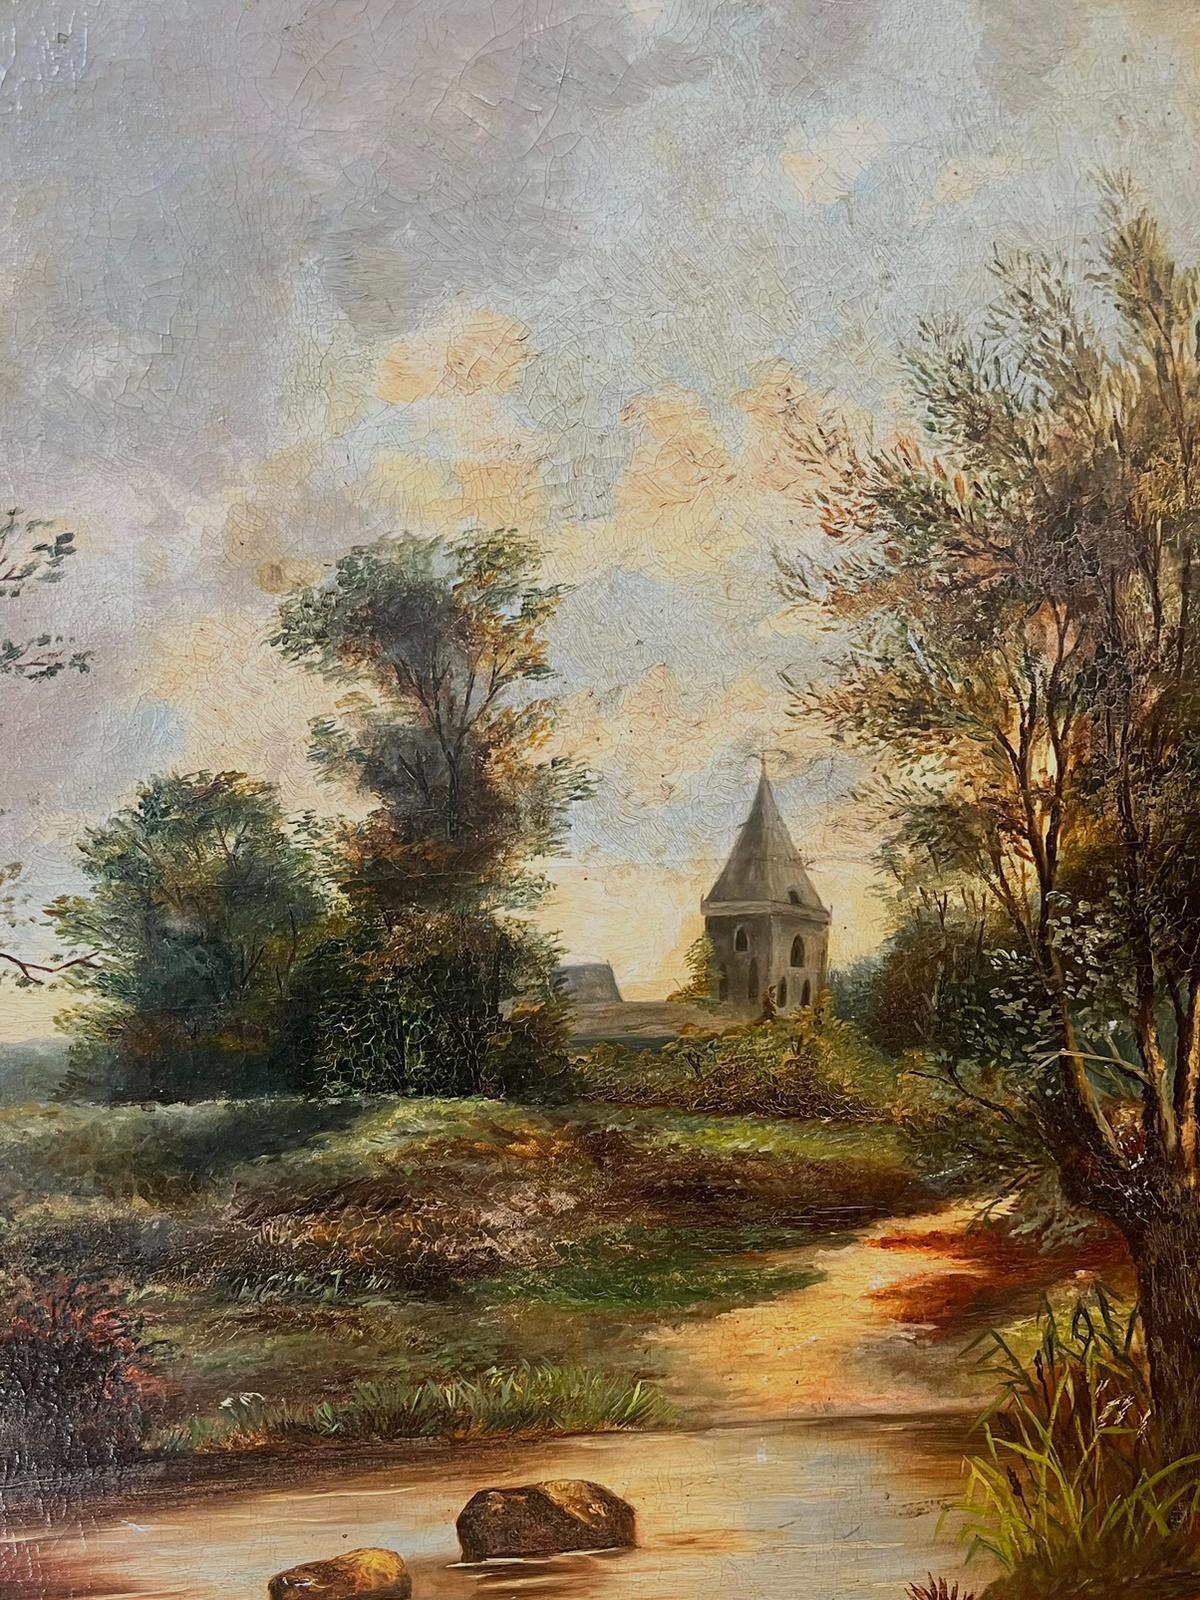 The Church in the Fields
British School, late 19th century
oil painting on canvas, framed
framed: 51.5 x 42 inches
canvas: 30 x 40 inches
provenance: private collection, England
condition: very good and sound condition; please note the frame has